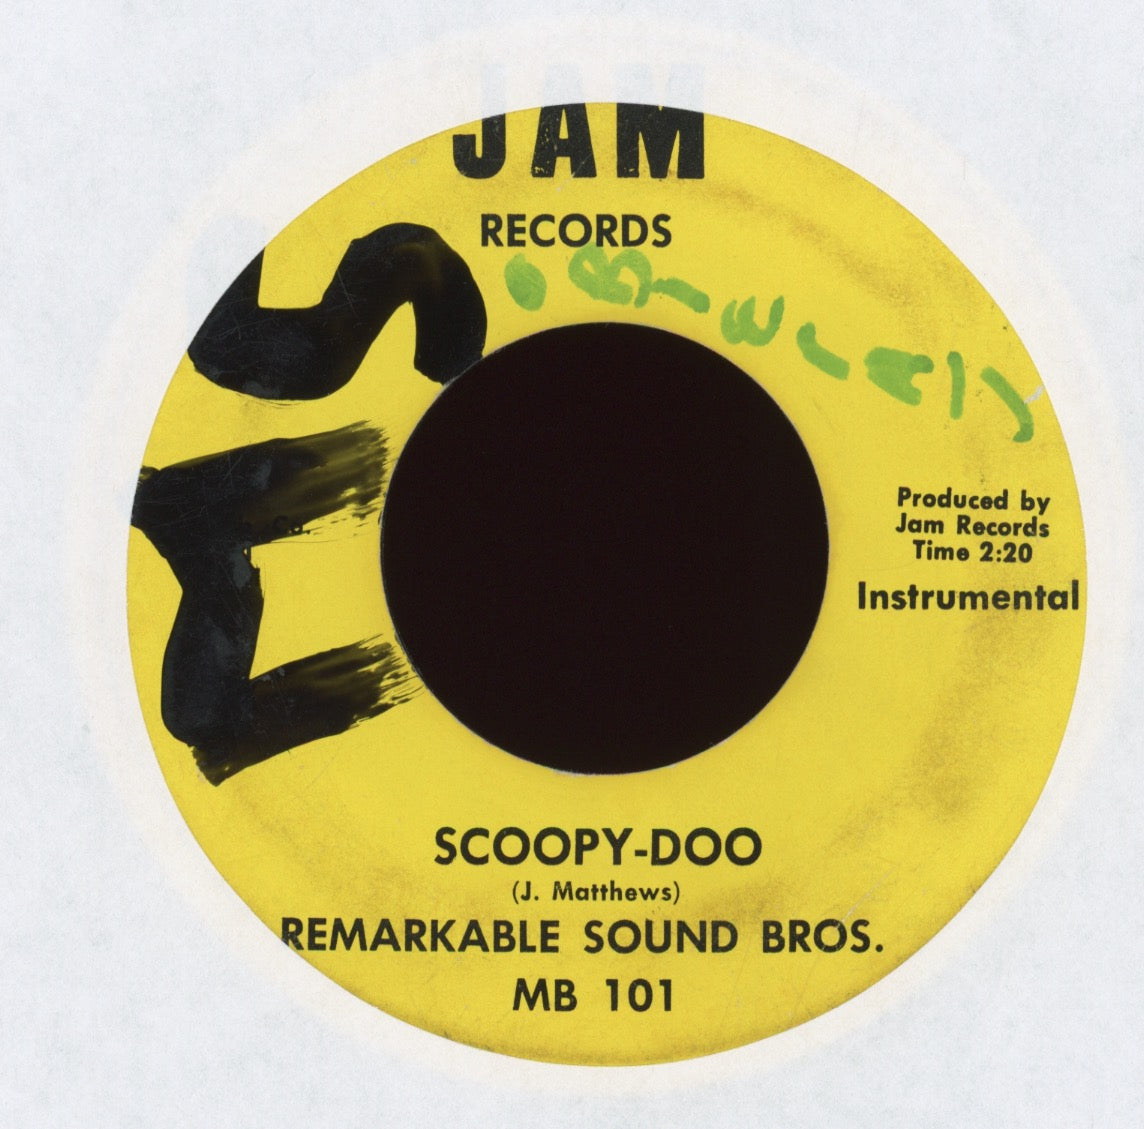 Carl Johnson & The Remarkable Sound Bros. - Scoopy - Doo on Jam Funk 45